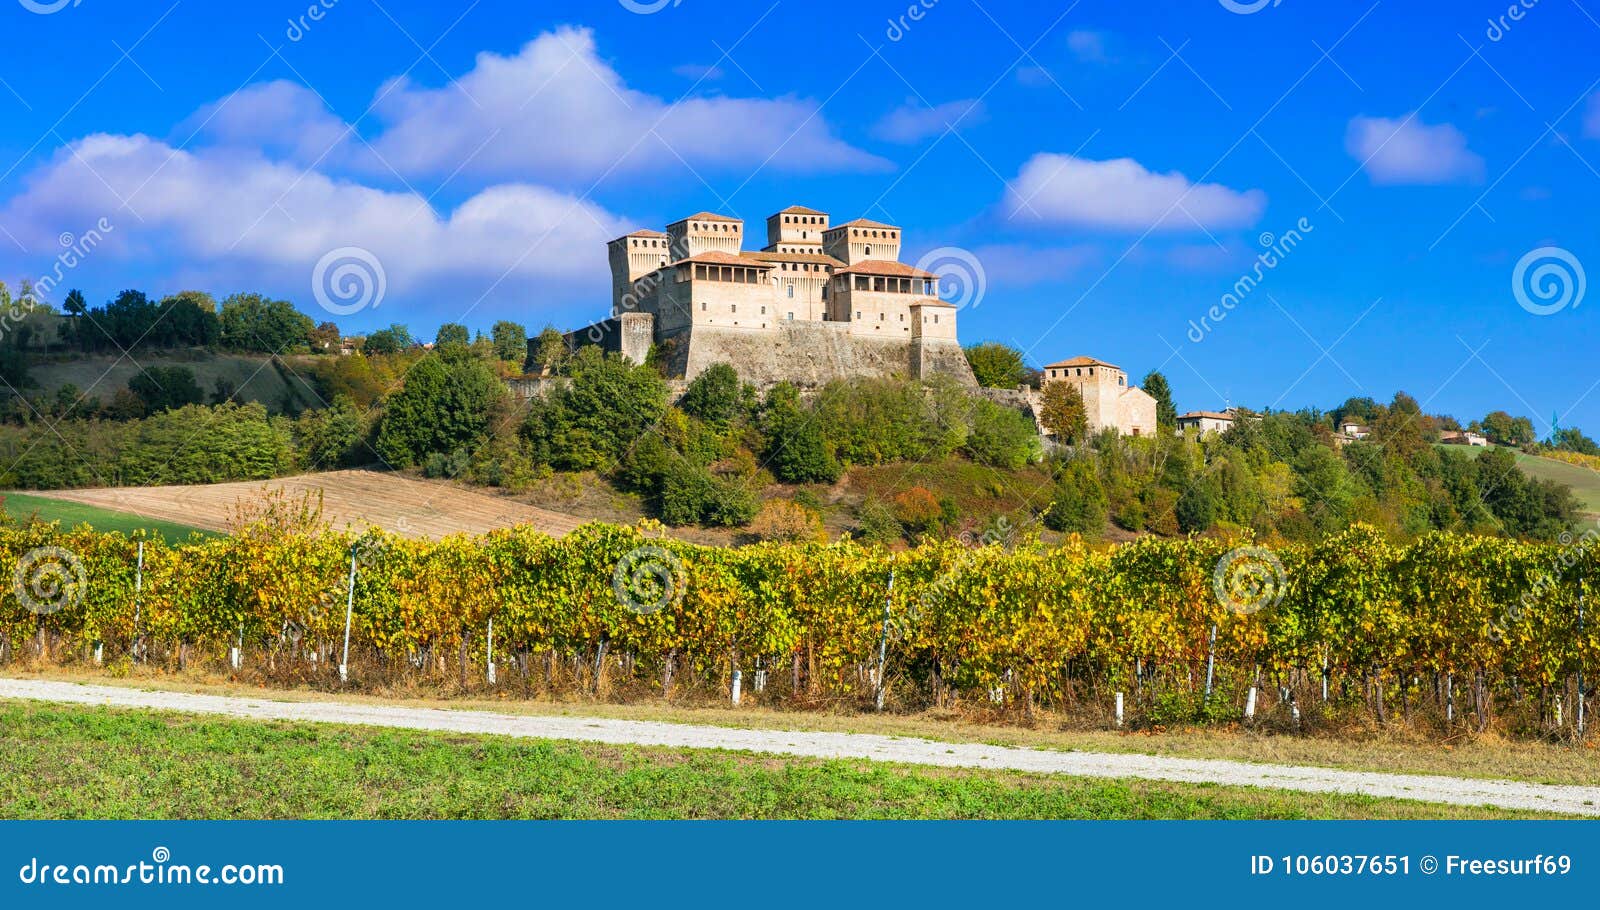 castles and vineyards of italy - medieval castello di torrechiara, parma province